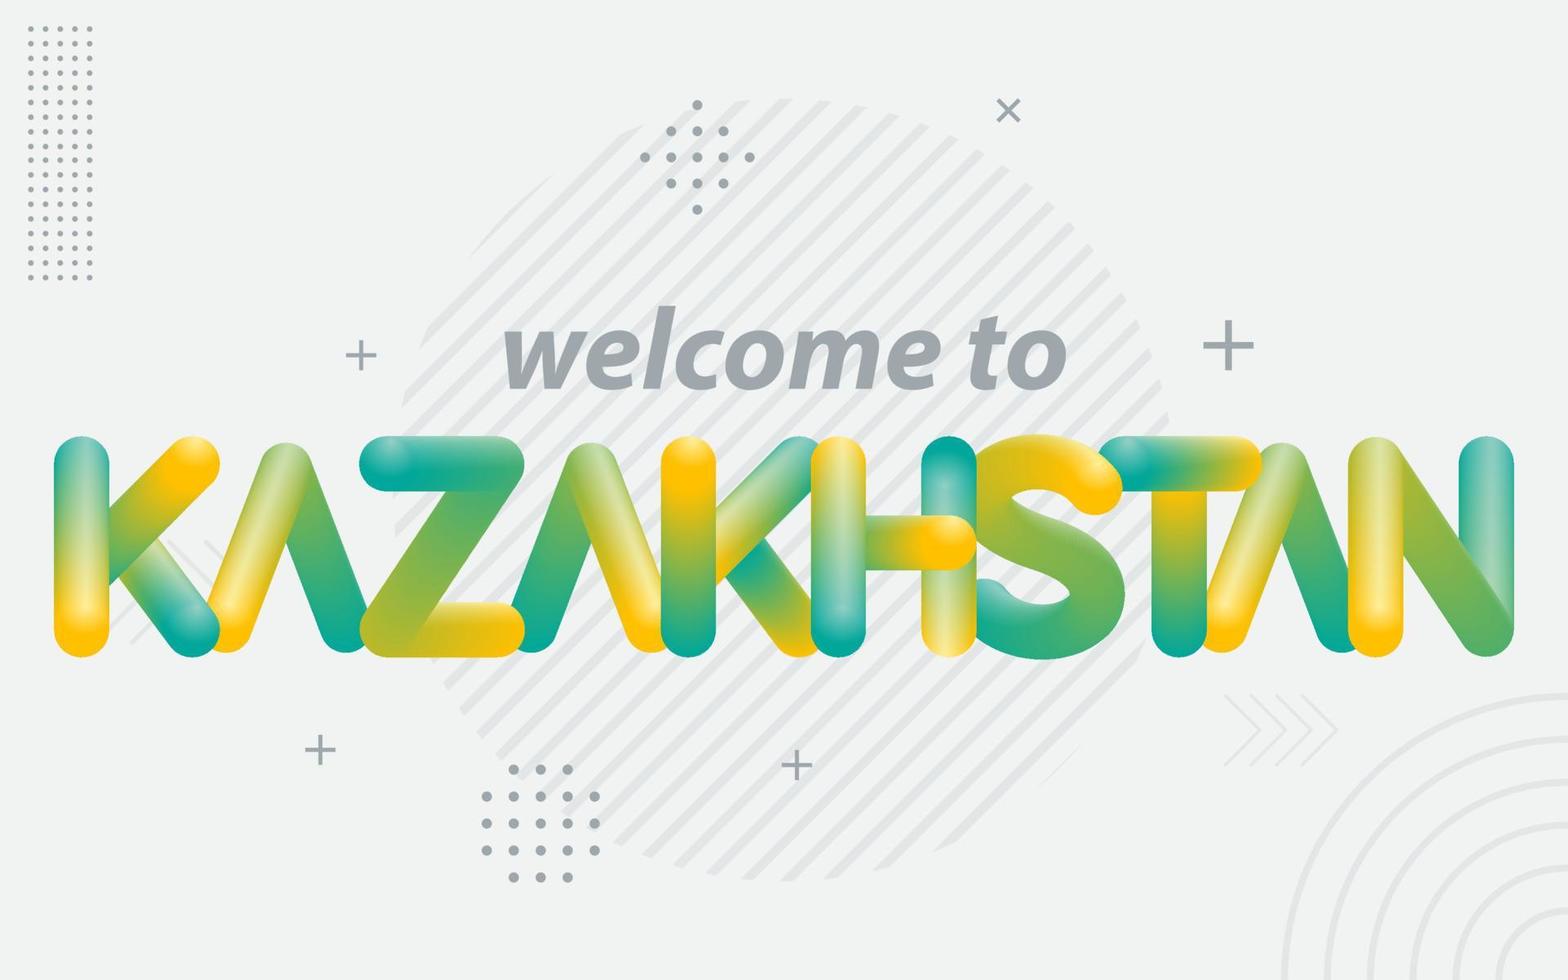 Welcome To Kazakhstan. Creative Typography with 3d Blend effect vector